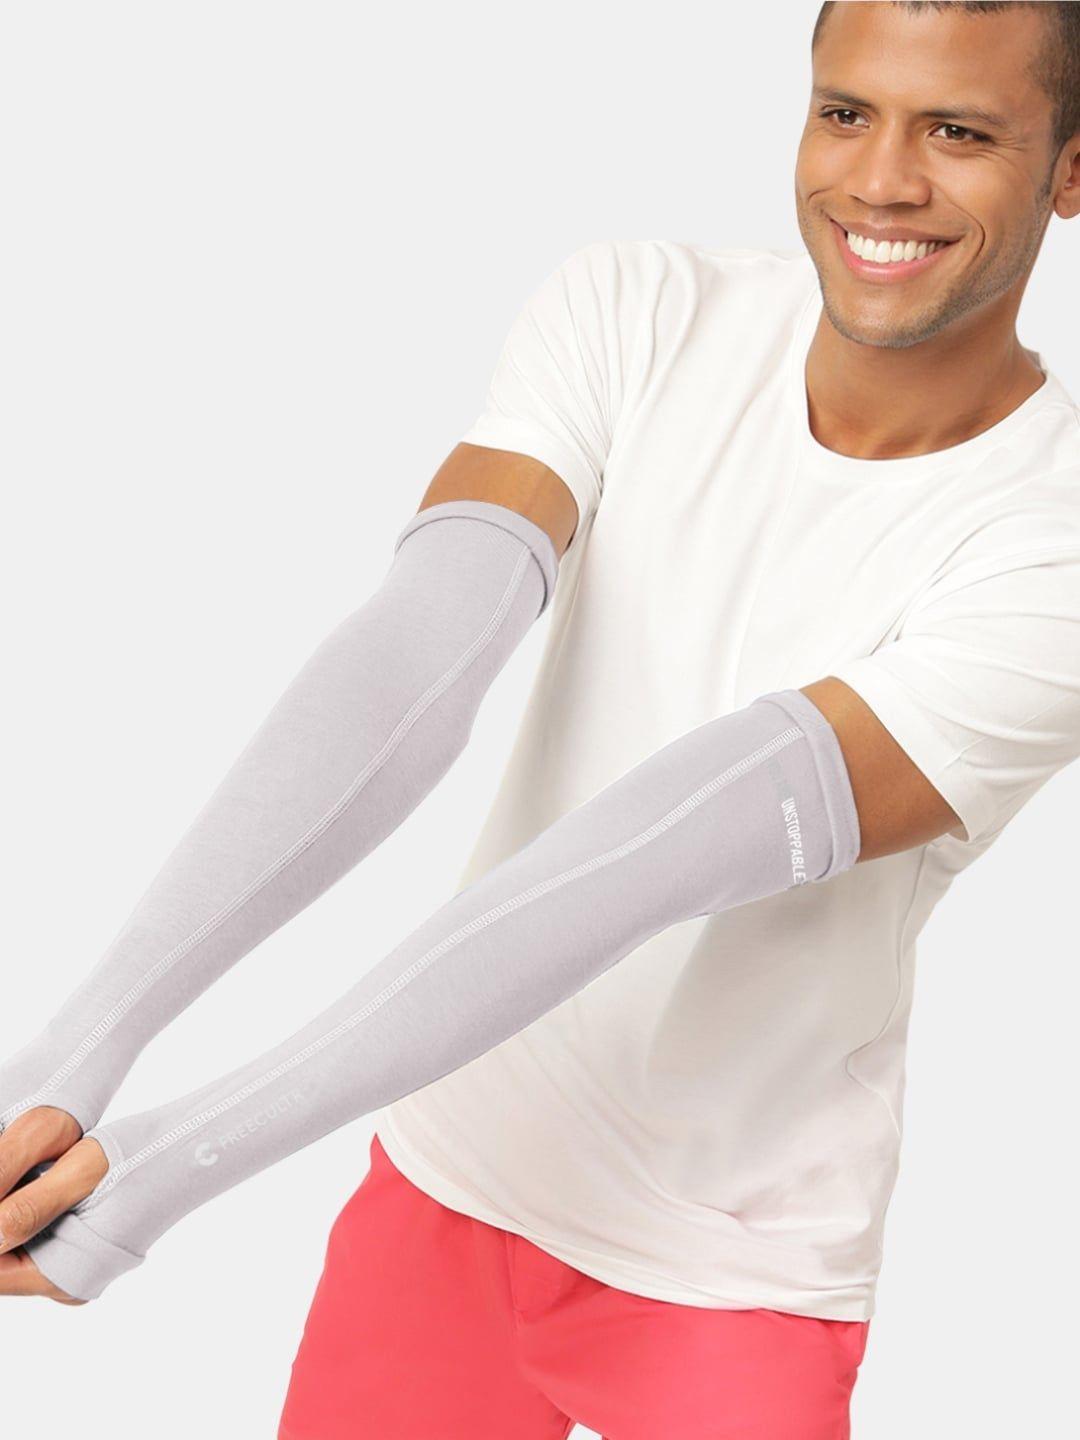 freecultr bamboo cotton antibacterial arm sleeves gloves